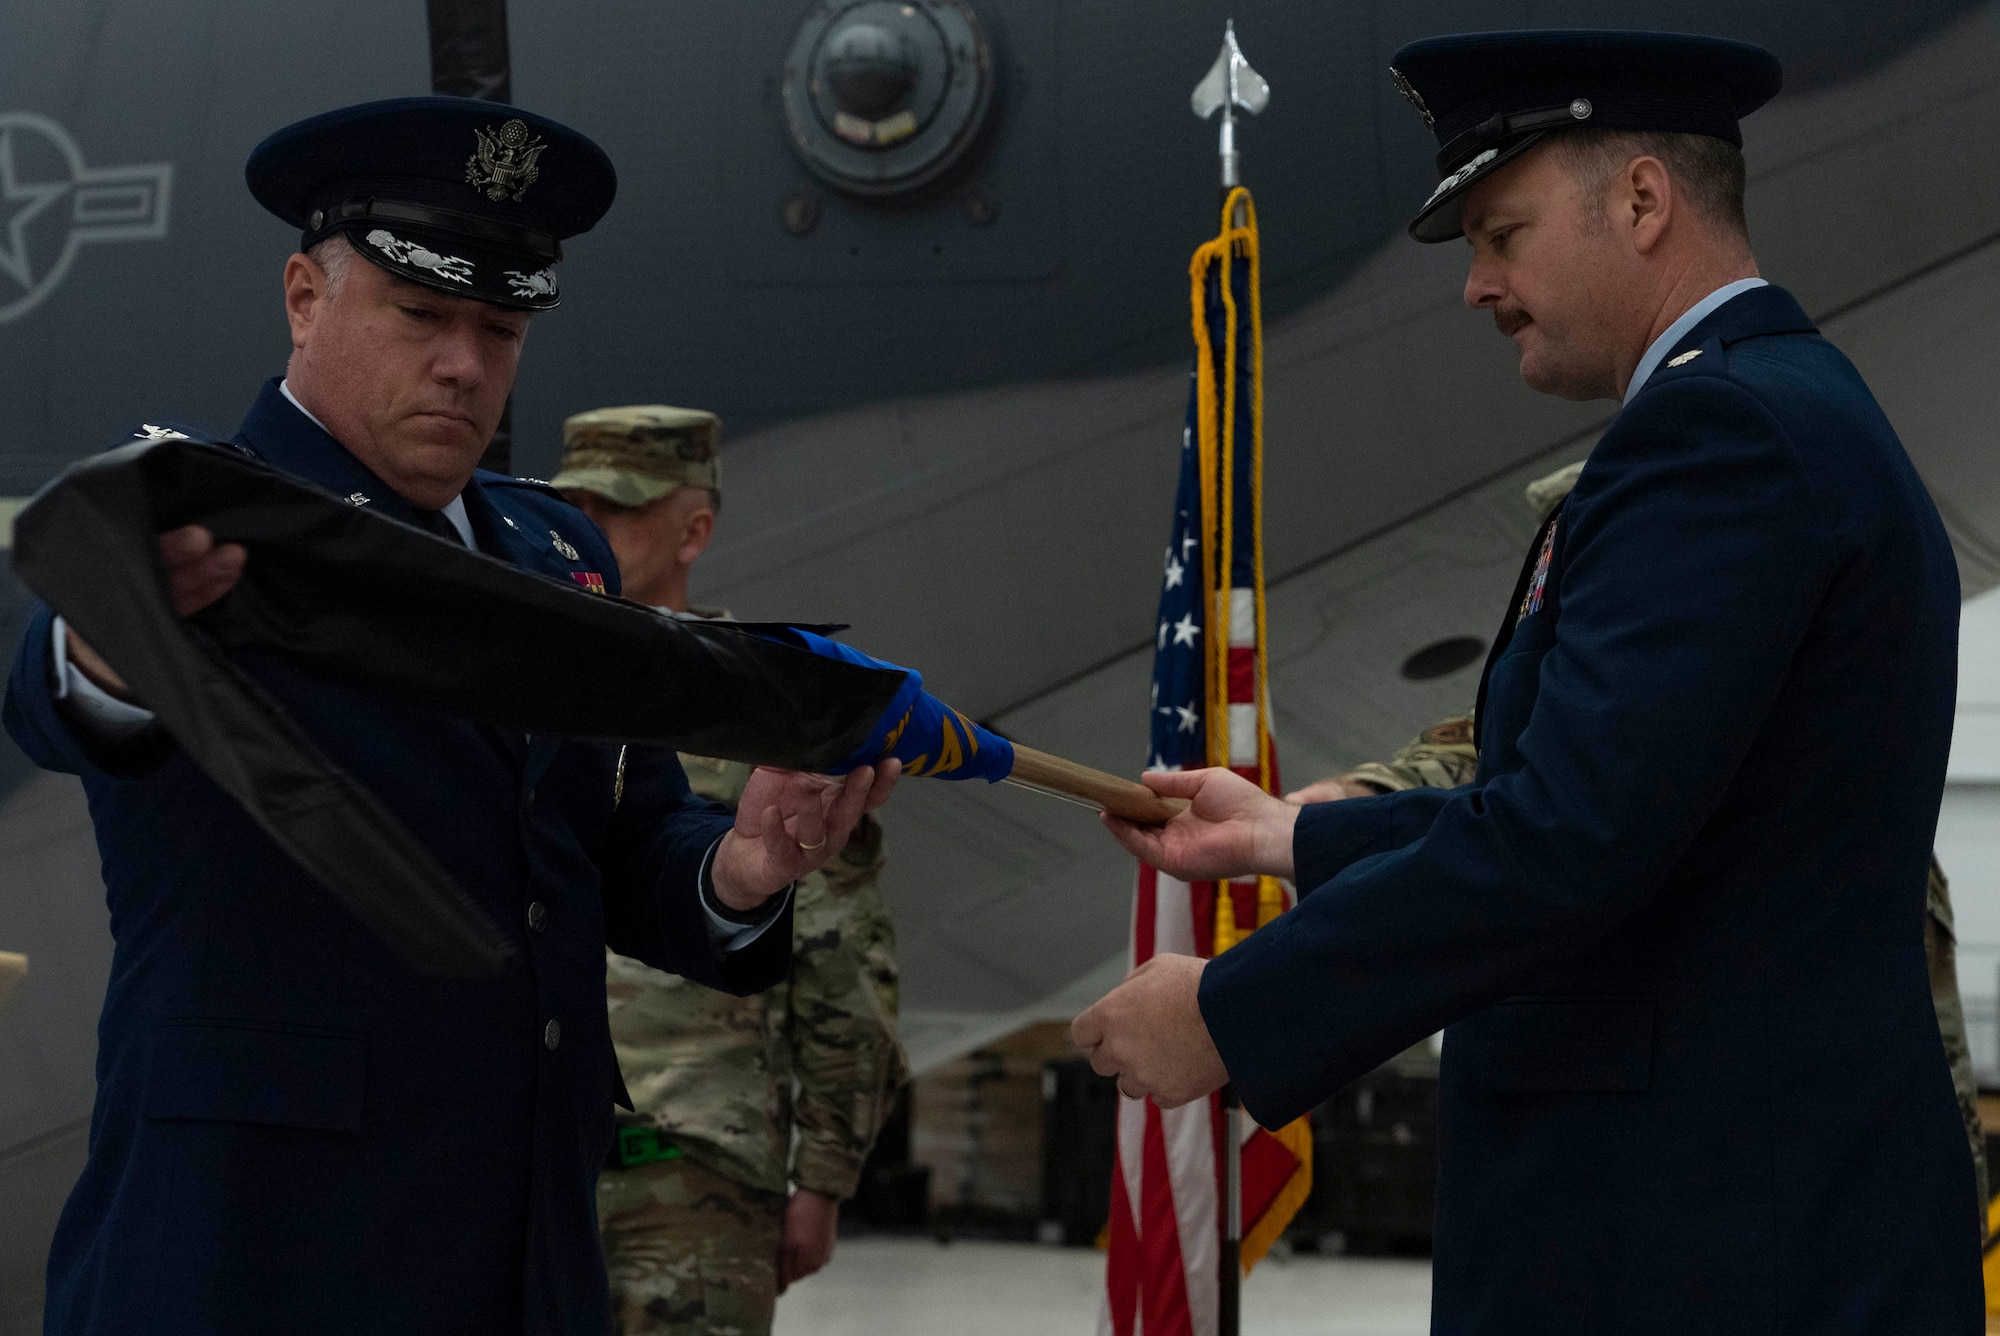 U.S. Air Force Col. Harry Seibert, 27th Special Operation Maintenance Group commander, left, and Lt. Col. Sean Allen, 16th Special Operations Aircraft Maintenance Squadron commander, right, uncase the new guidon of the redesignated 16th SOAMXS during a ceremony at Cannon Air Force Base, N.M., March 15, 2024. The redesignation was enacted to better align the unit with its identity and mission: to develop elite maintainers ready to generate safe, reliable aircraft to execute special operations missions. (U.S. Air Force photo by Staff Sgt. Nicholas Swift)